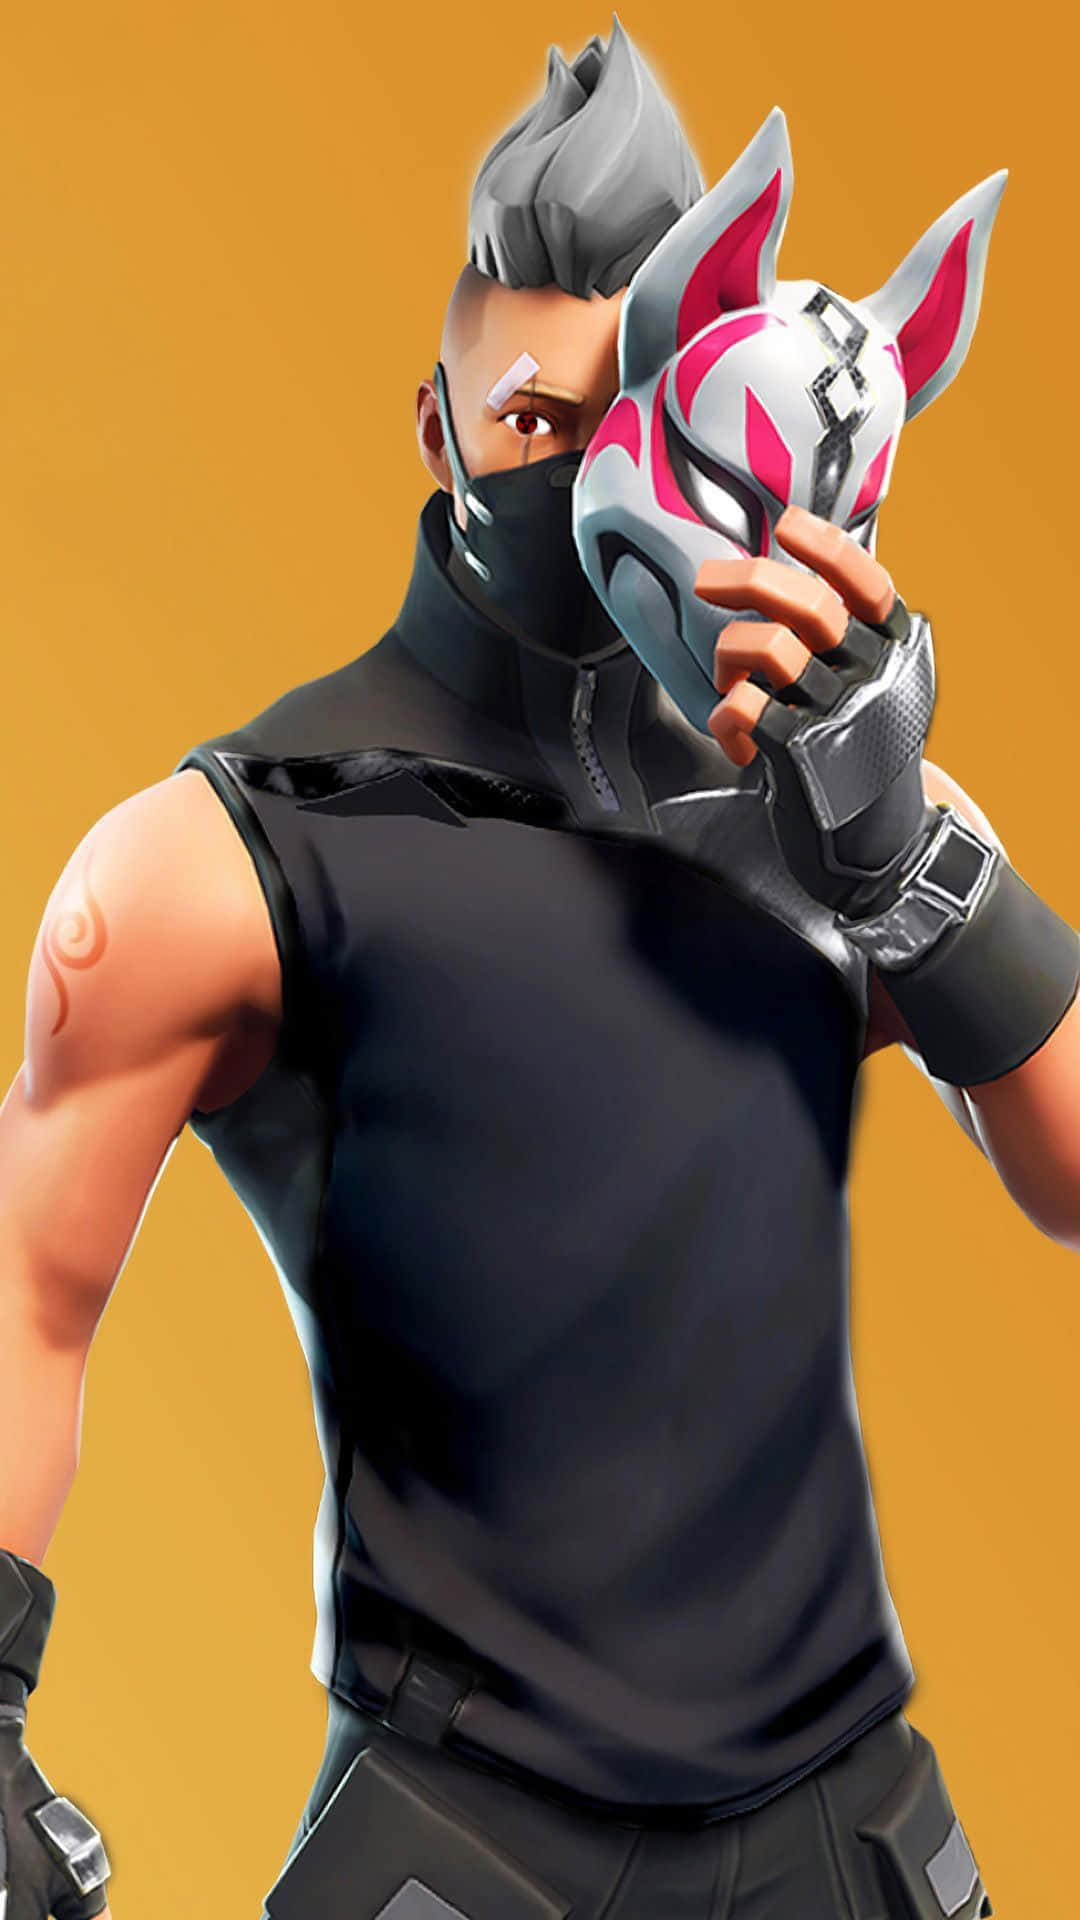 Fortnite - A Man In A Black Mask Holding A Mask Wallpaper